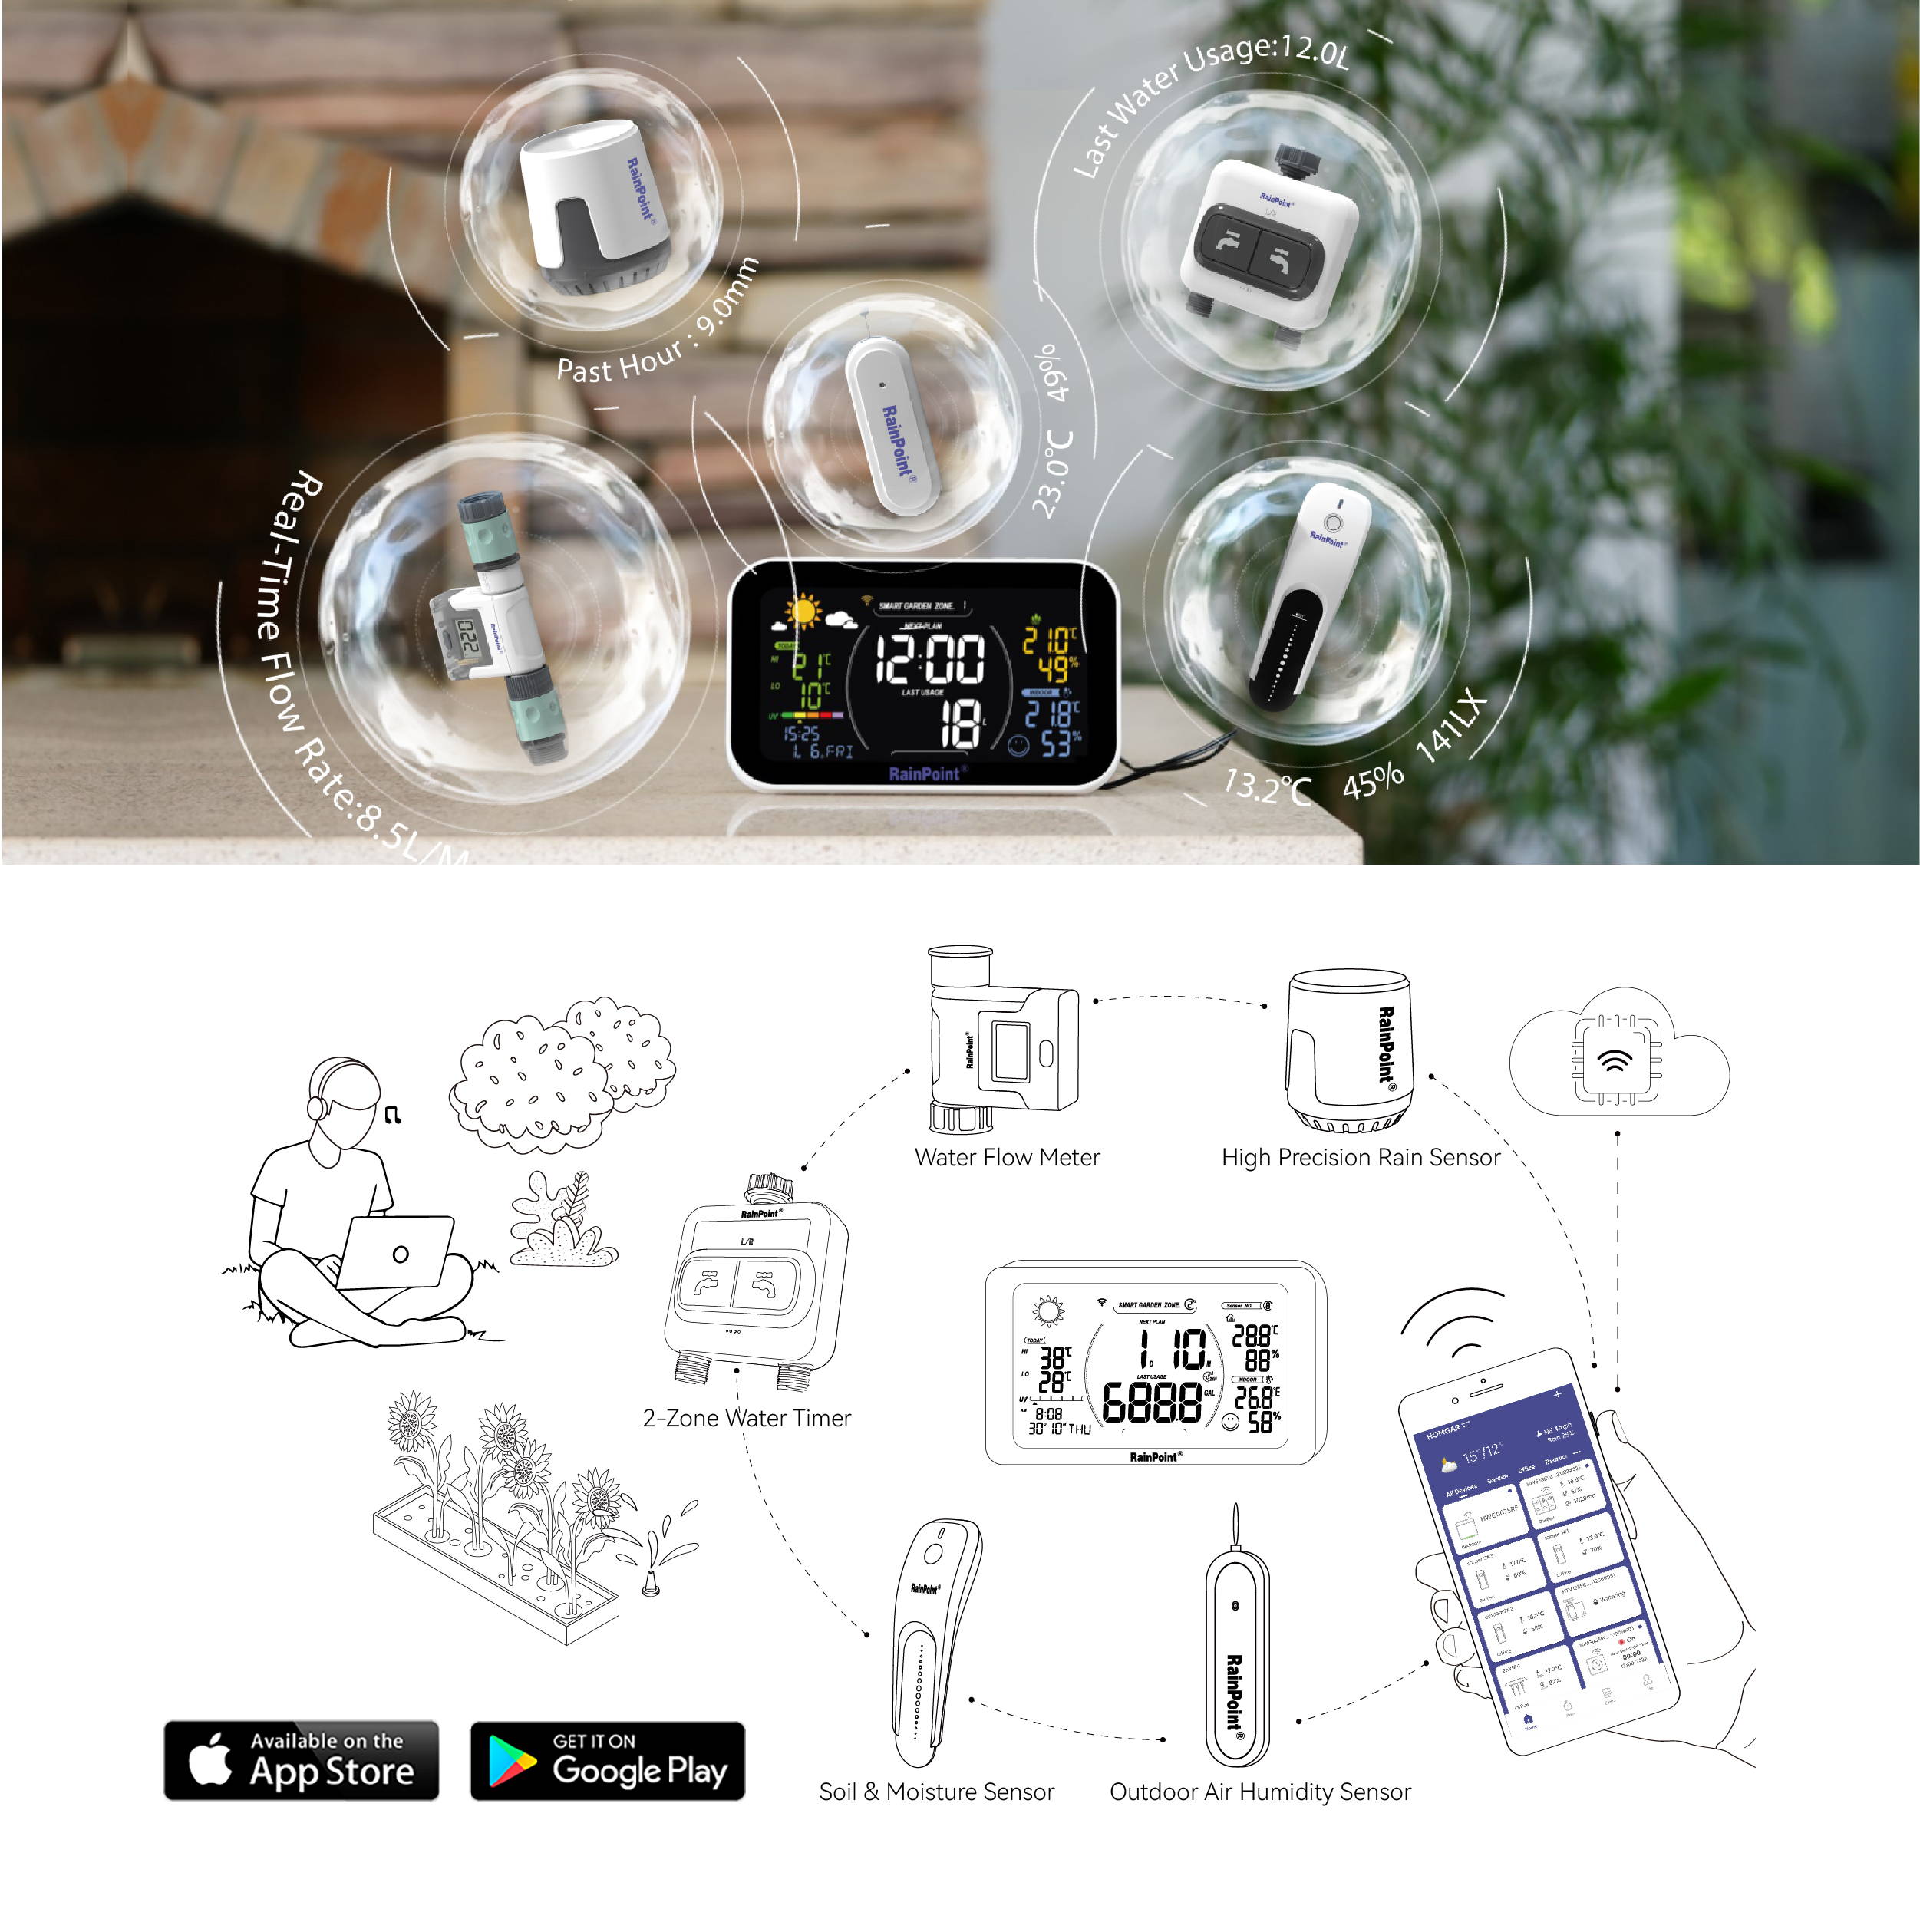 RainPoint is an intelligent irrigation system that integrates a Water Timer, Soil & Sunlicht Sensor, Rain Gauge, and Outdoor Thermometer for self-analysis and regulation. With RainPoint Smart+, you can experience the wonder of a future garden today.